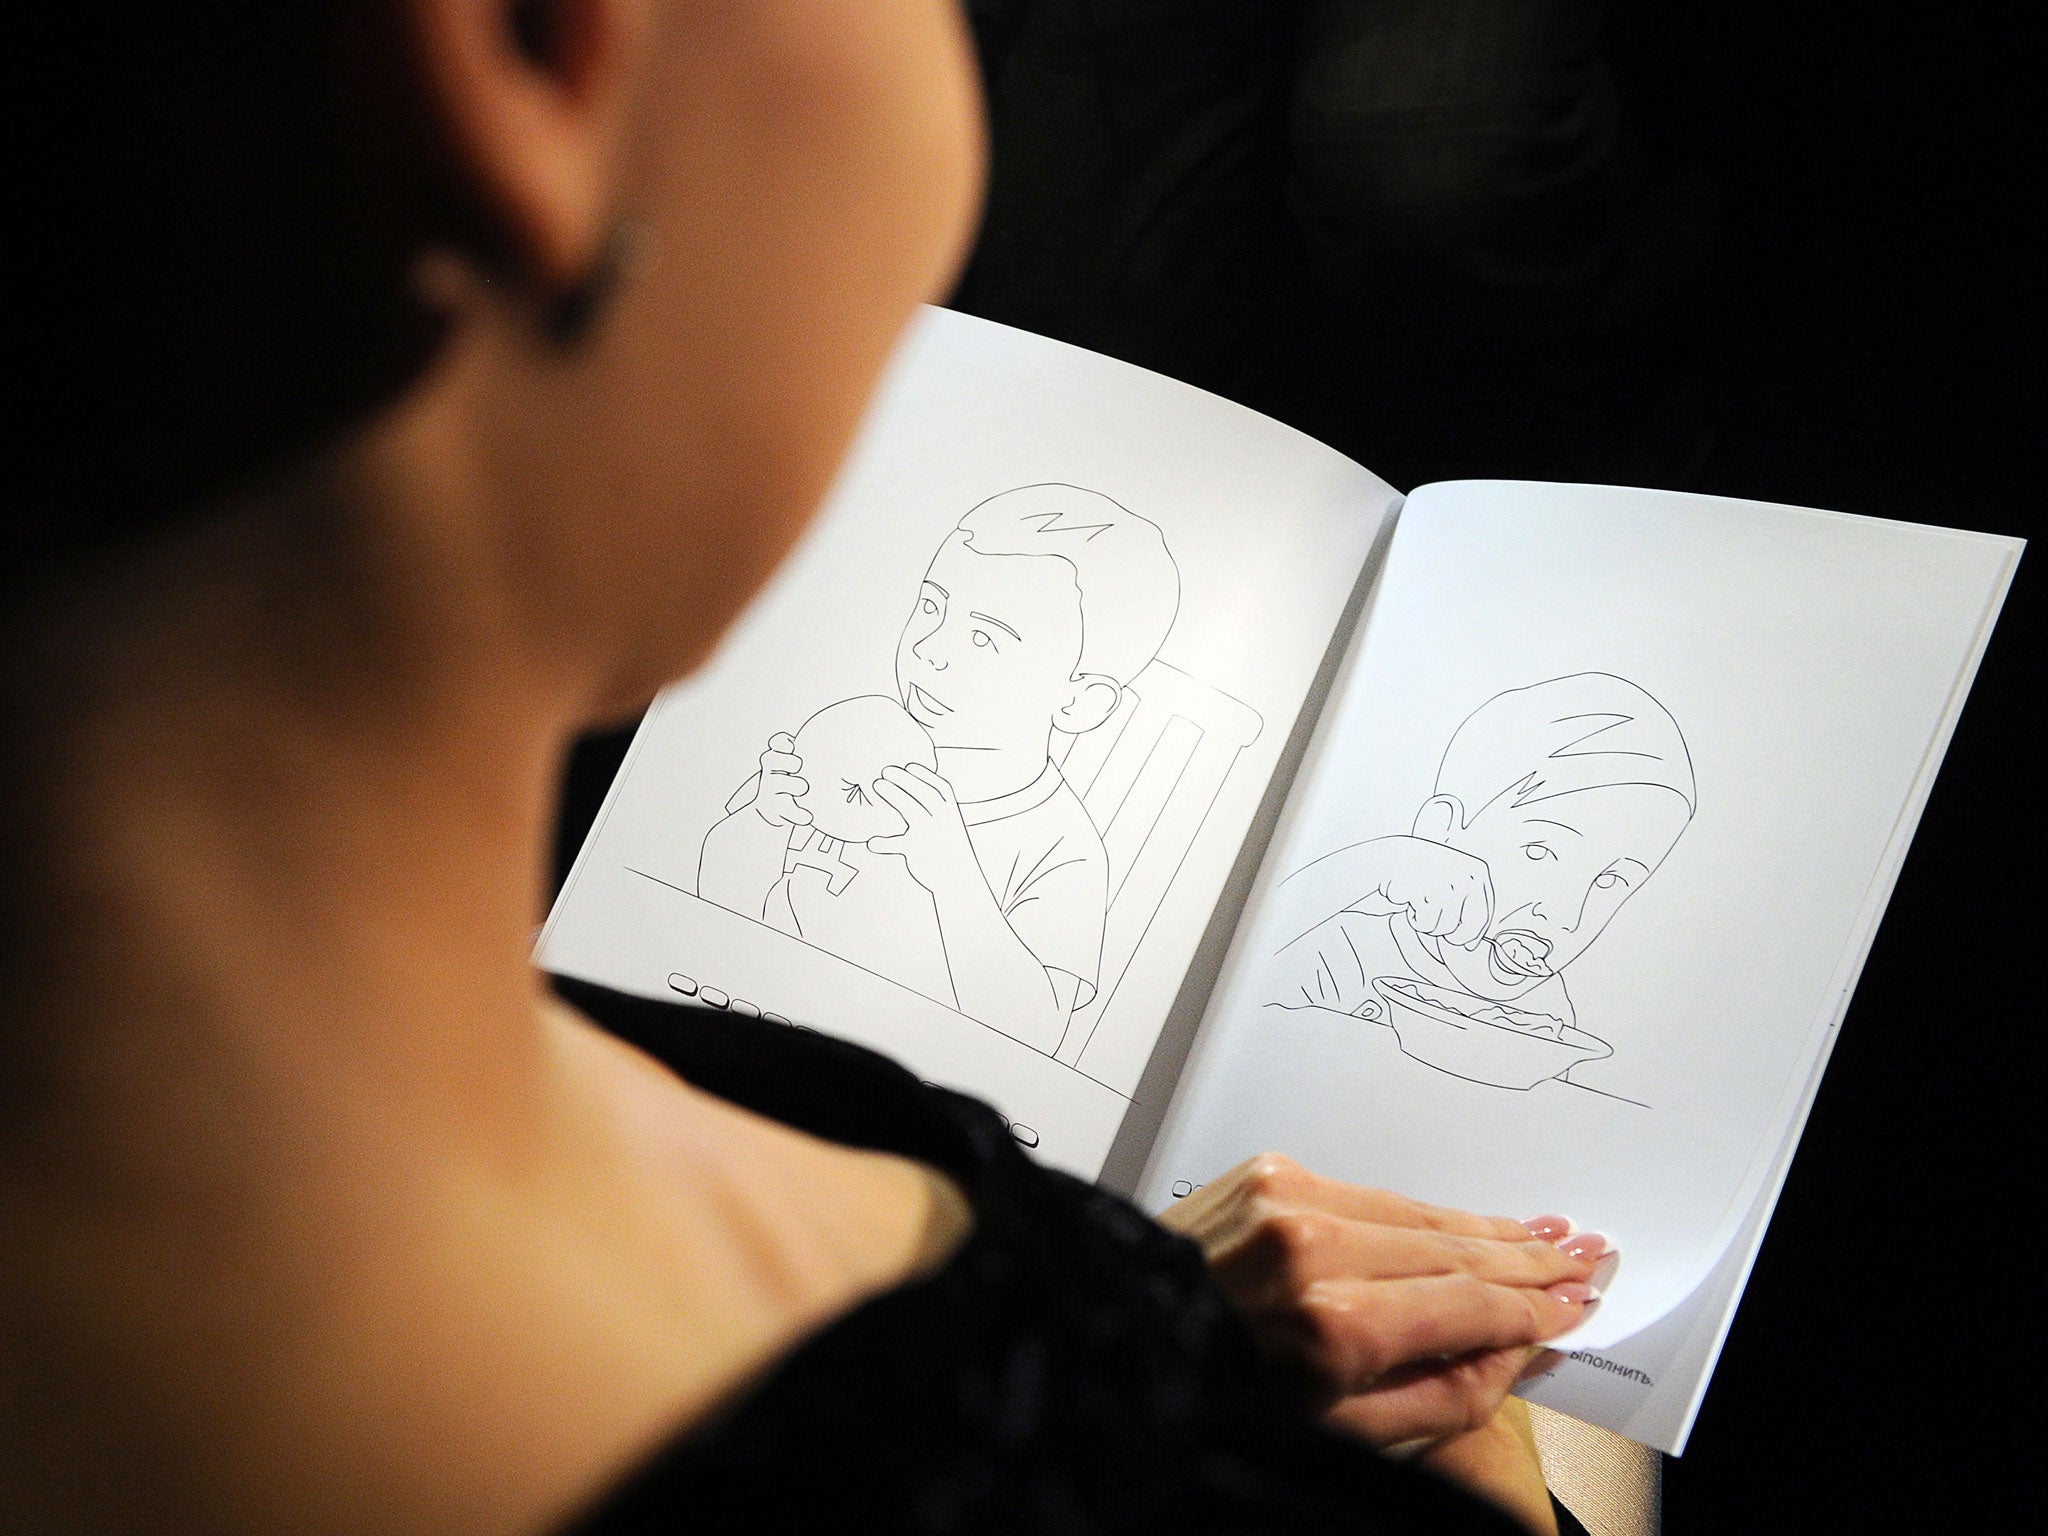 A woman holds a colouring book during a presentation in Moscow on October 6, 2011. A Moscow publishing house has released a children's colouring book in which two boys called Vova and Dima, closely resembling Prime Minister Vladimir Putin and President Dm